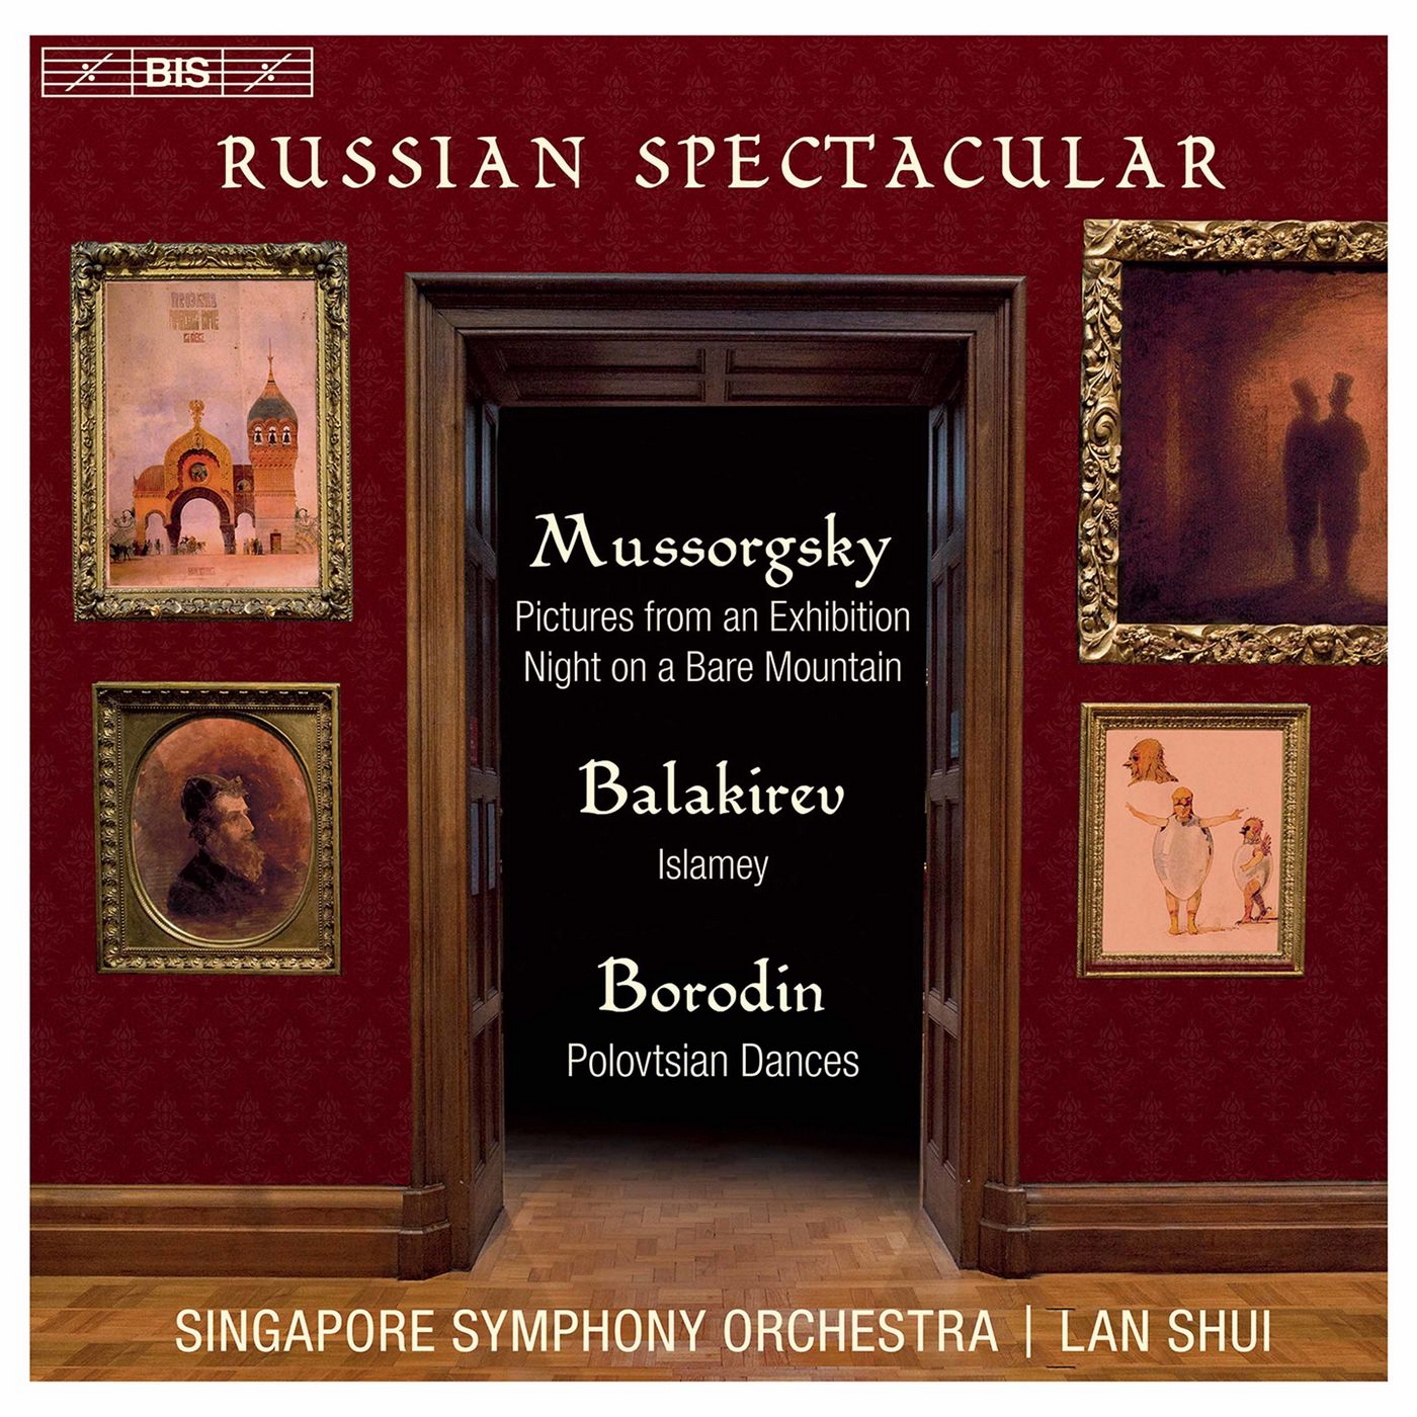 Singapore Symphony Orchestra - Russian Spectacular